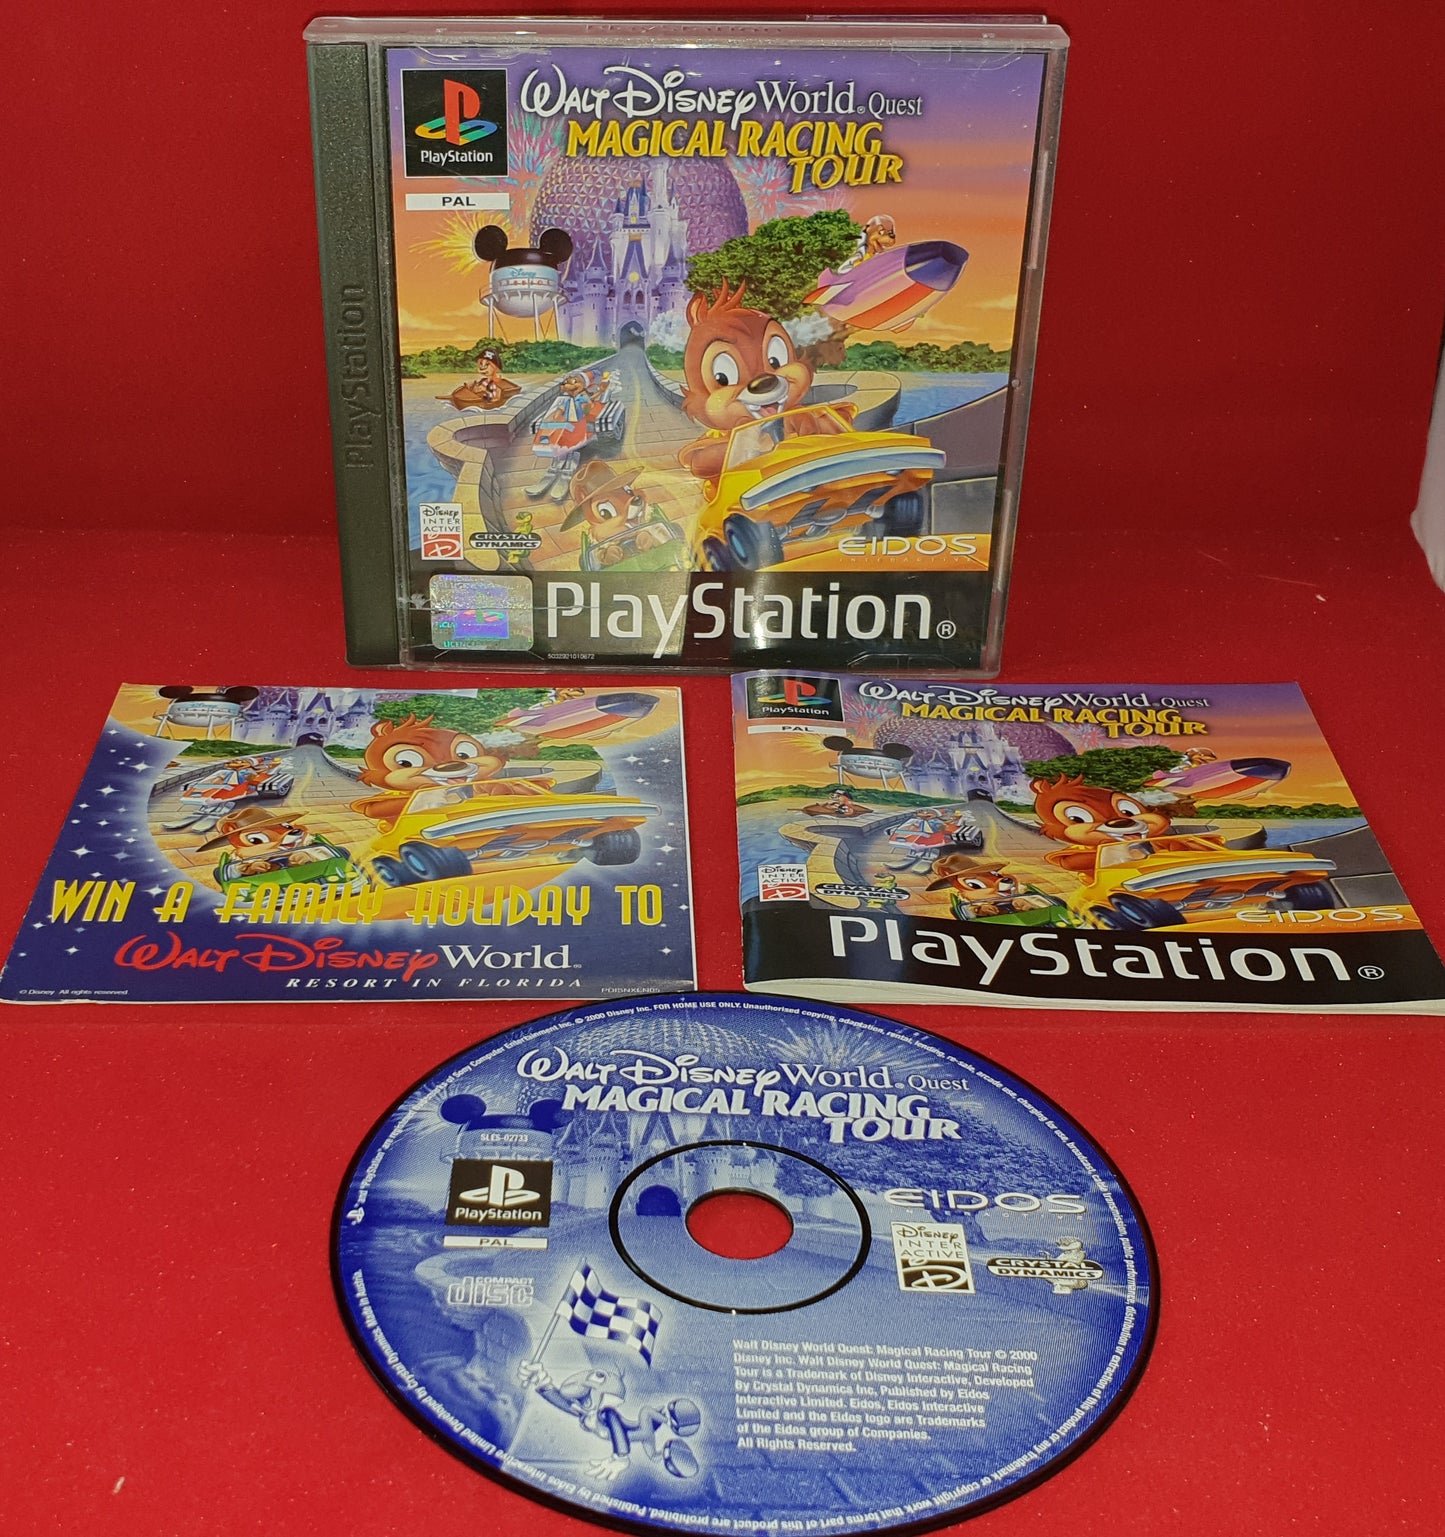 Walt Disney World Quest Magical Racing Tour Sony Playstation 1 (PS1) Game